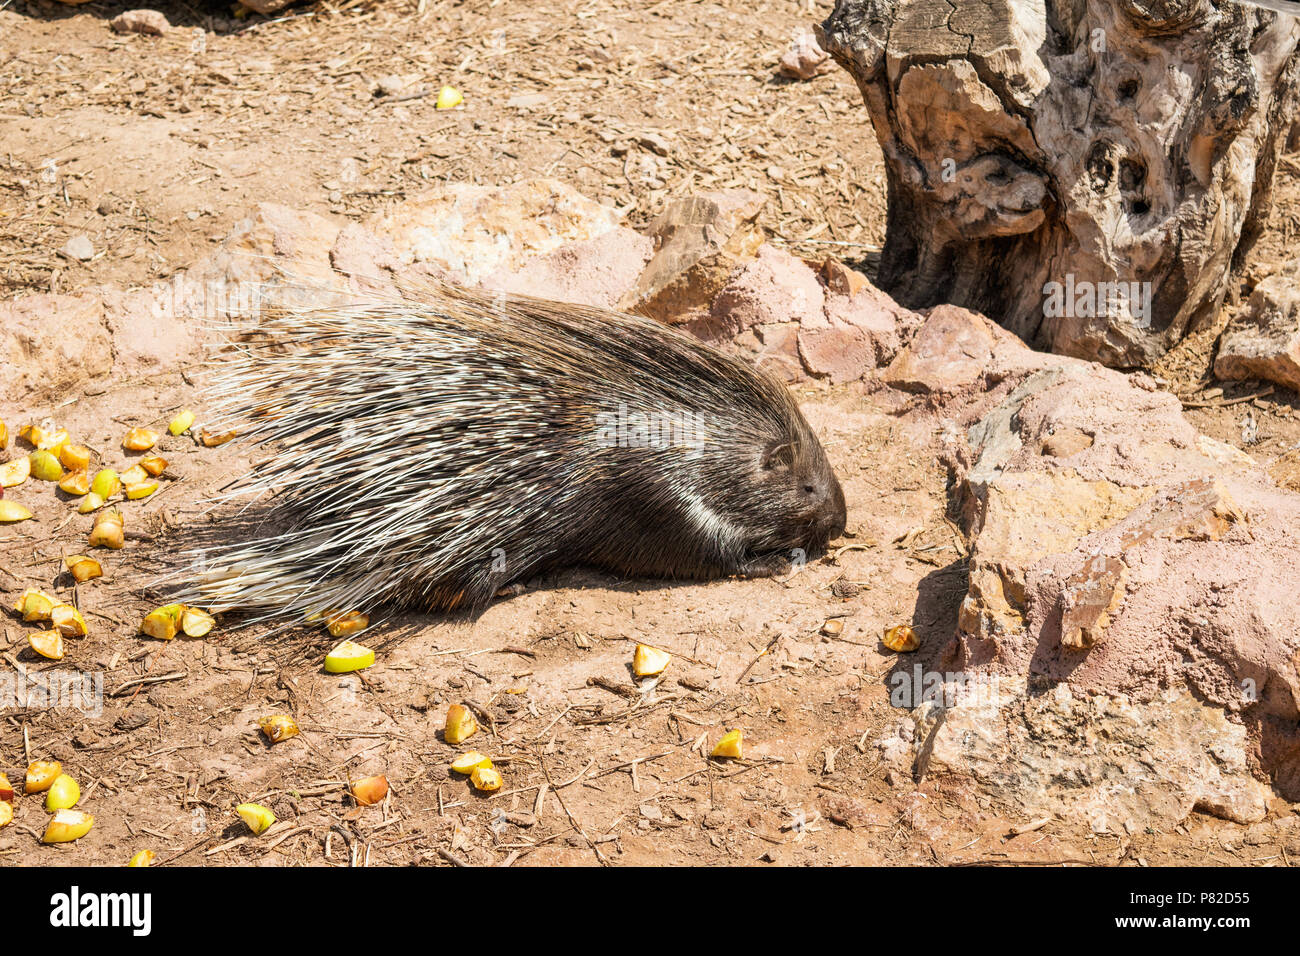 Indian Crested Porcupine (Hystrix indica), eating in outdoor enclosure Stock Photo